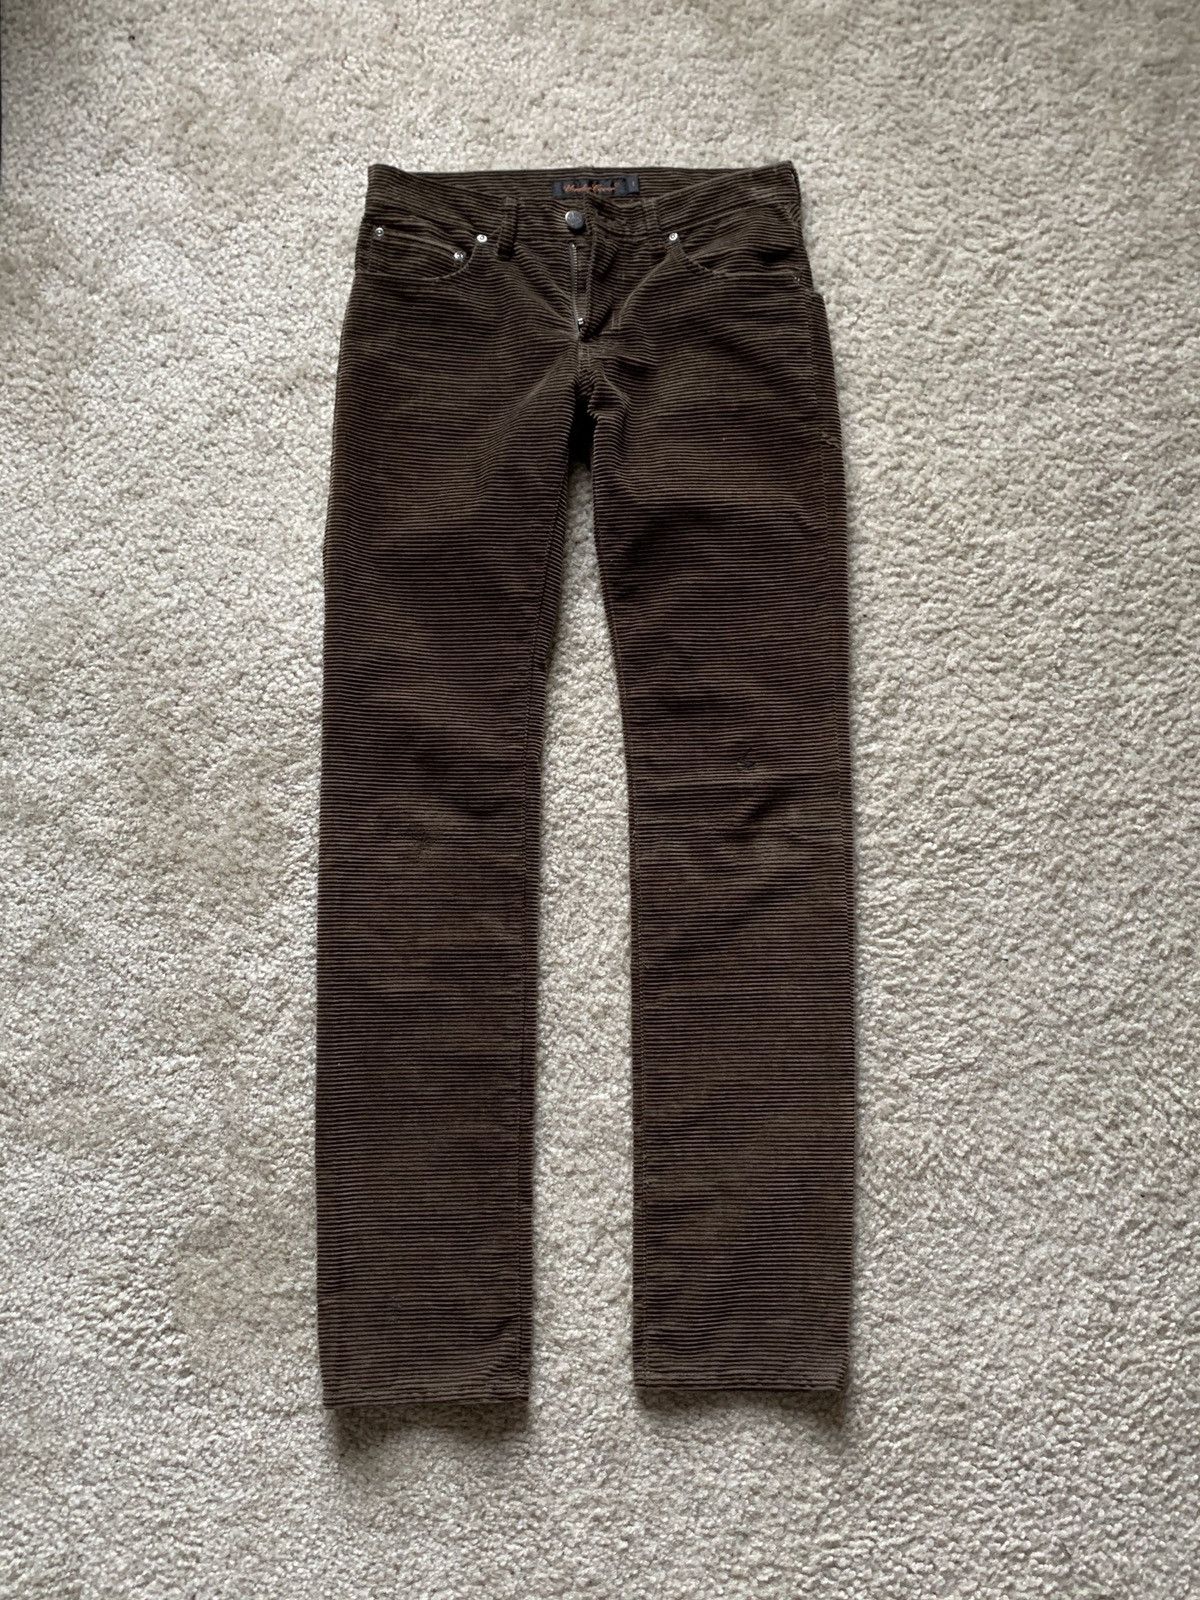 Undercover A/W ‘05 Arts and Crafts Horizontal Brown Corduroy Pants ...